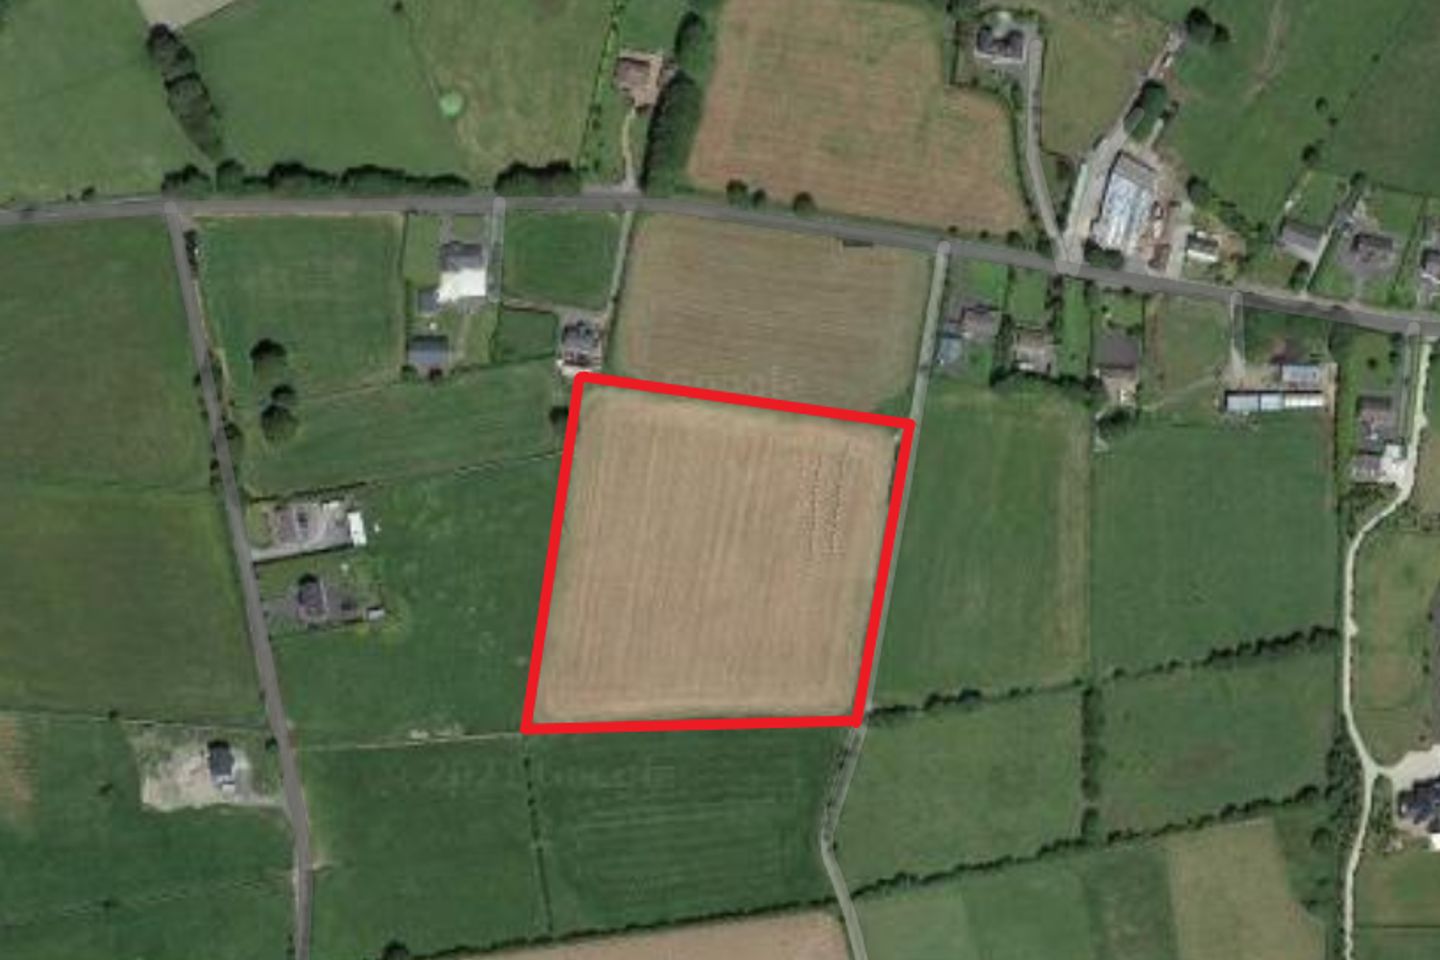 0.75 acre Site at Ballinvoher, Turloughmore, Co. Galway